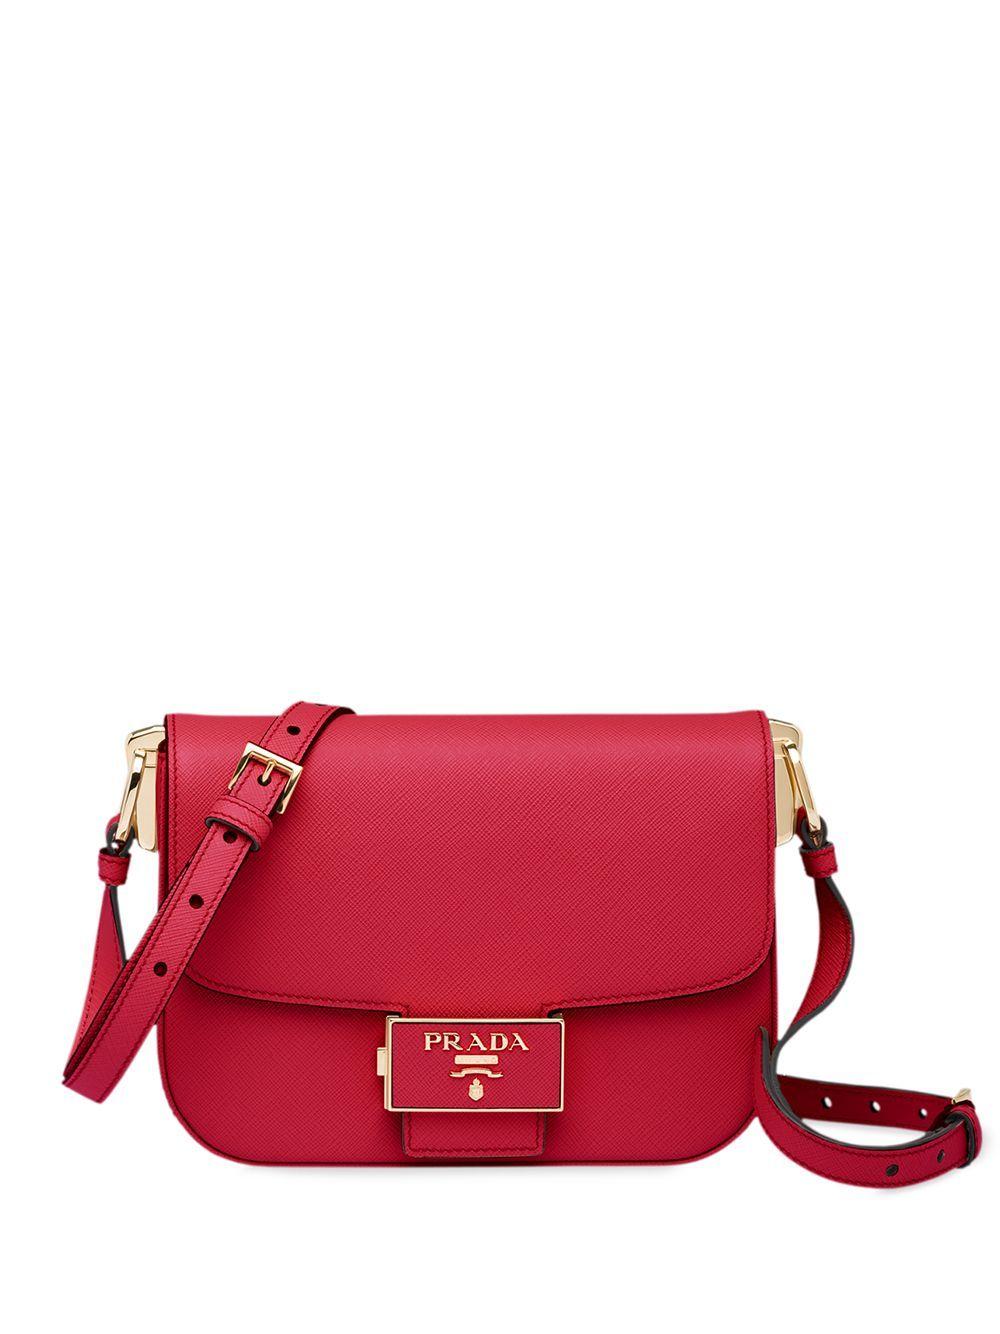 Prada Saffiano Leather Bag in Red - Save 30% | Lyst